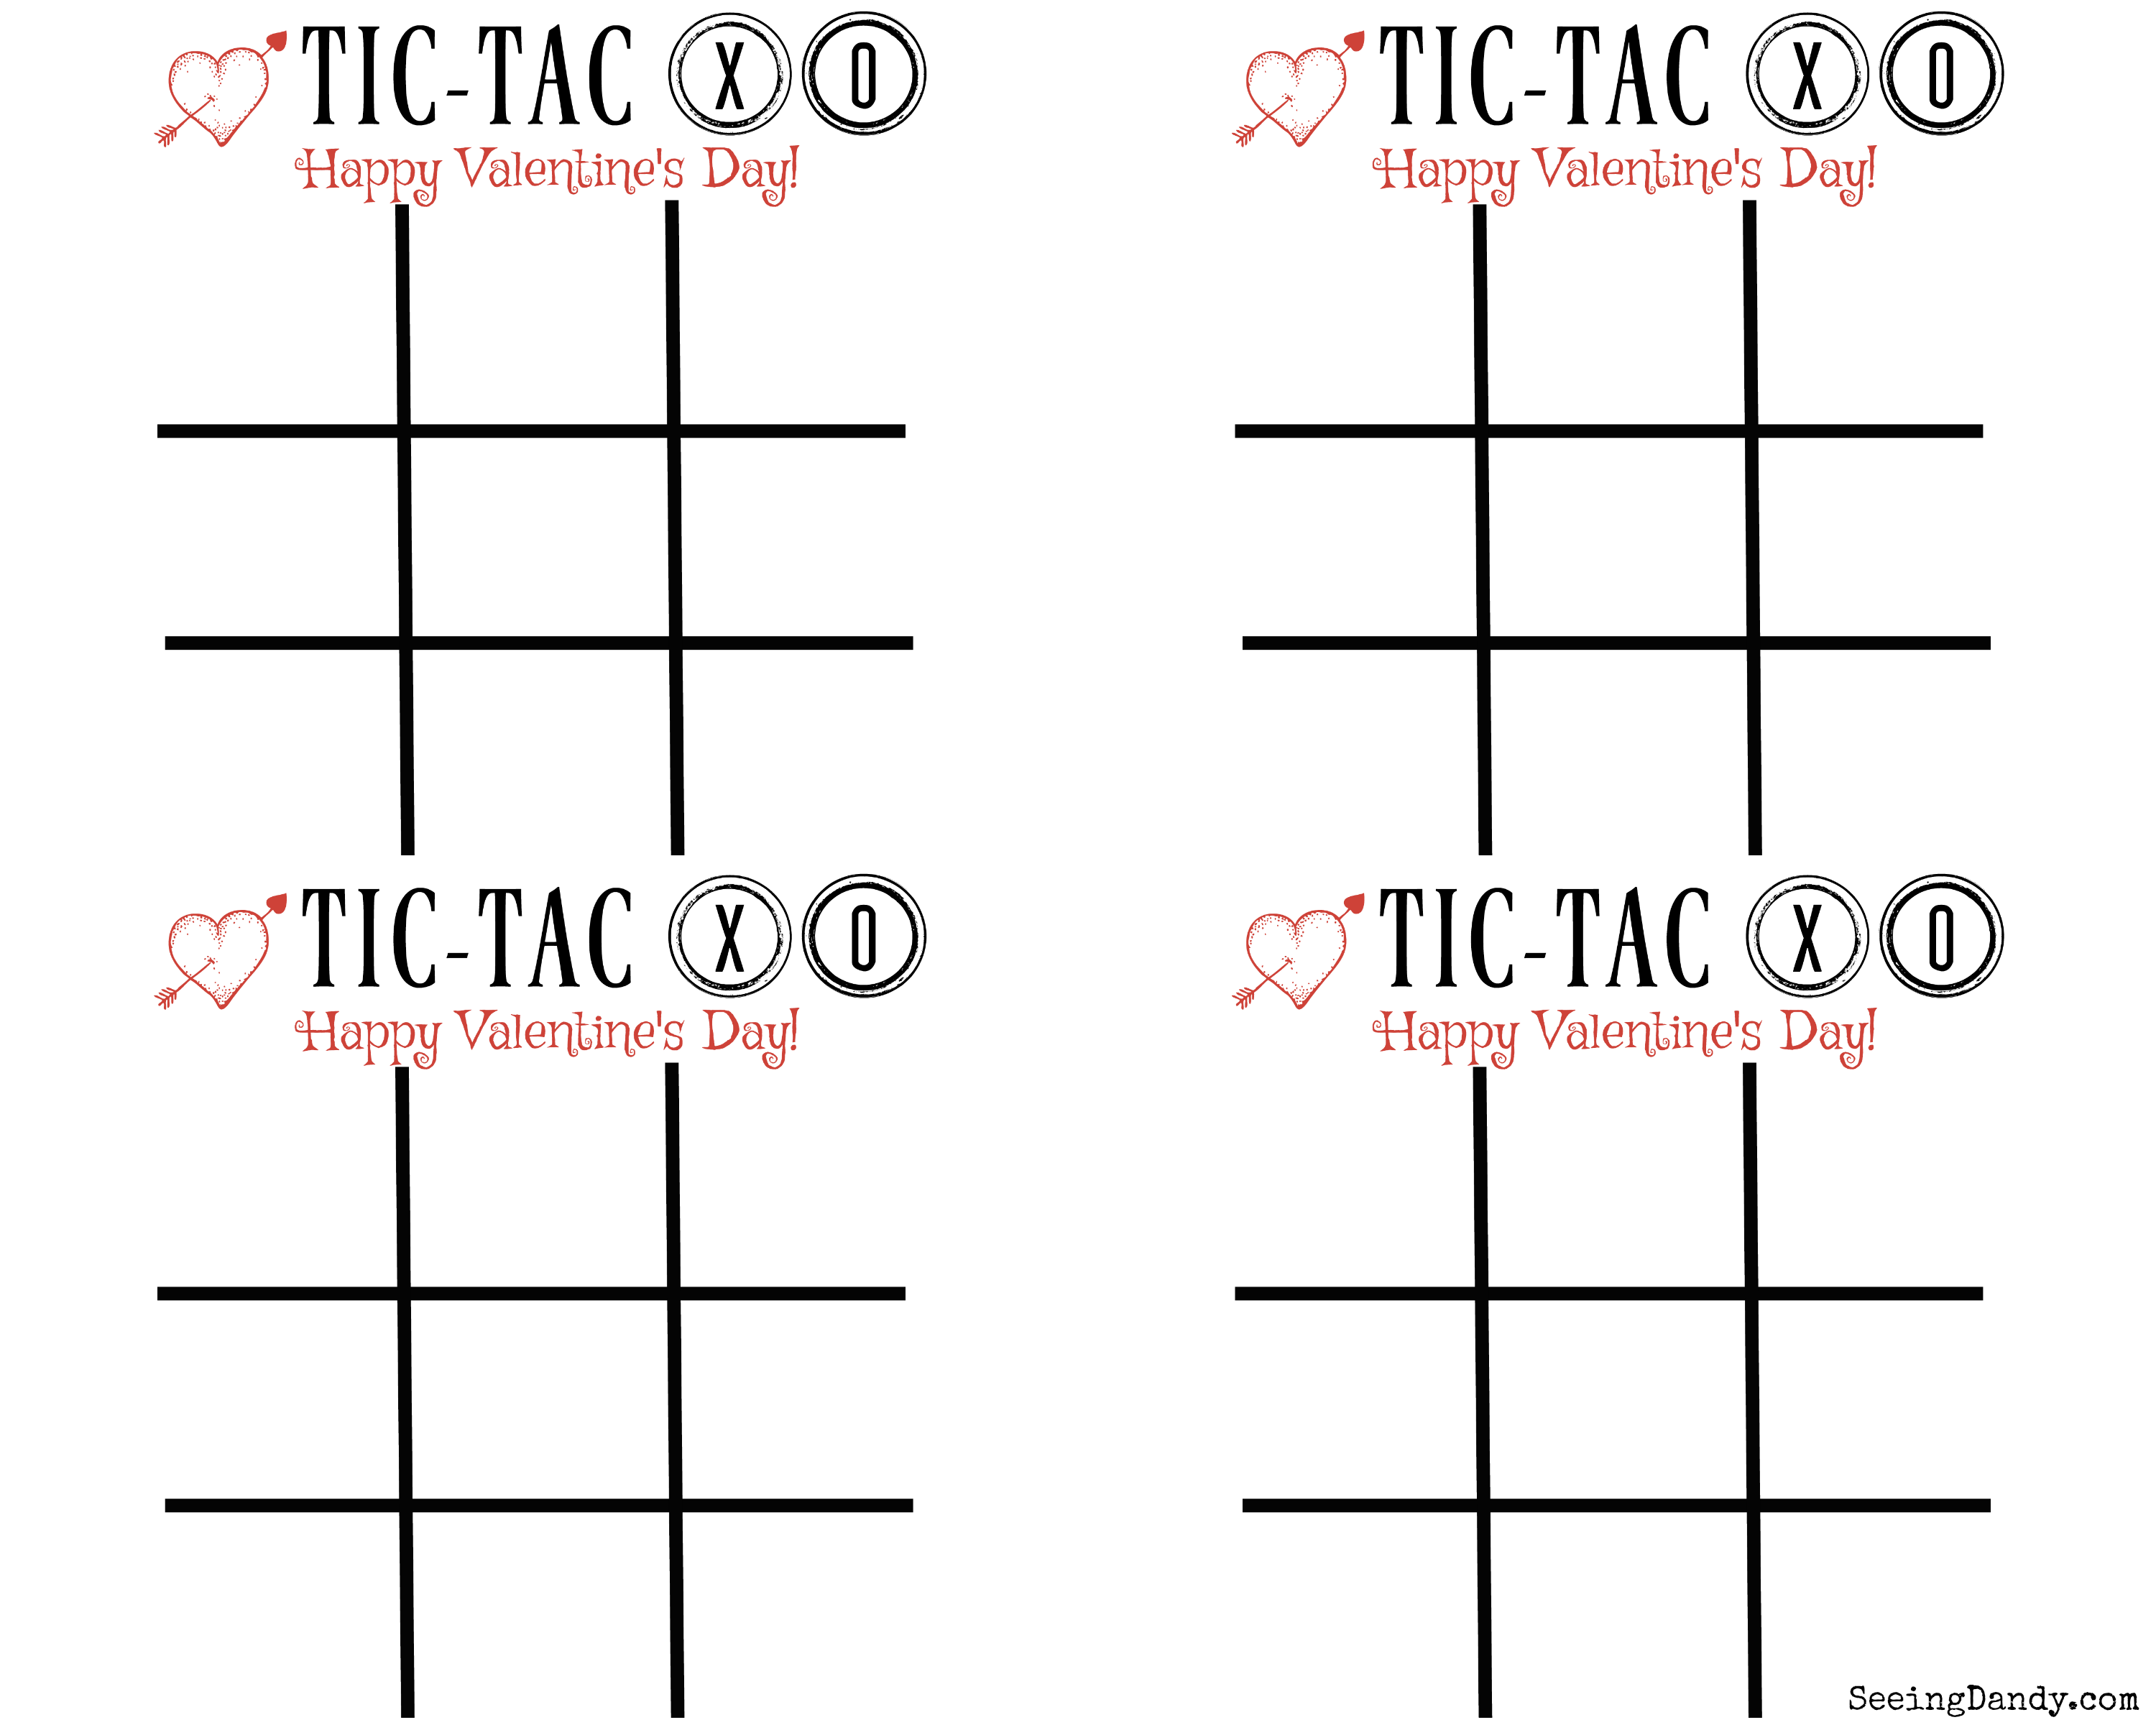 Free Printable Tic Tac XO Valentine's Day Cards - Seeing Dandy